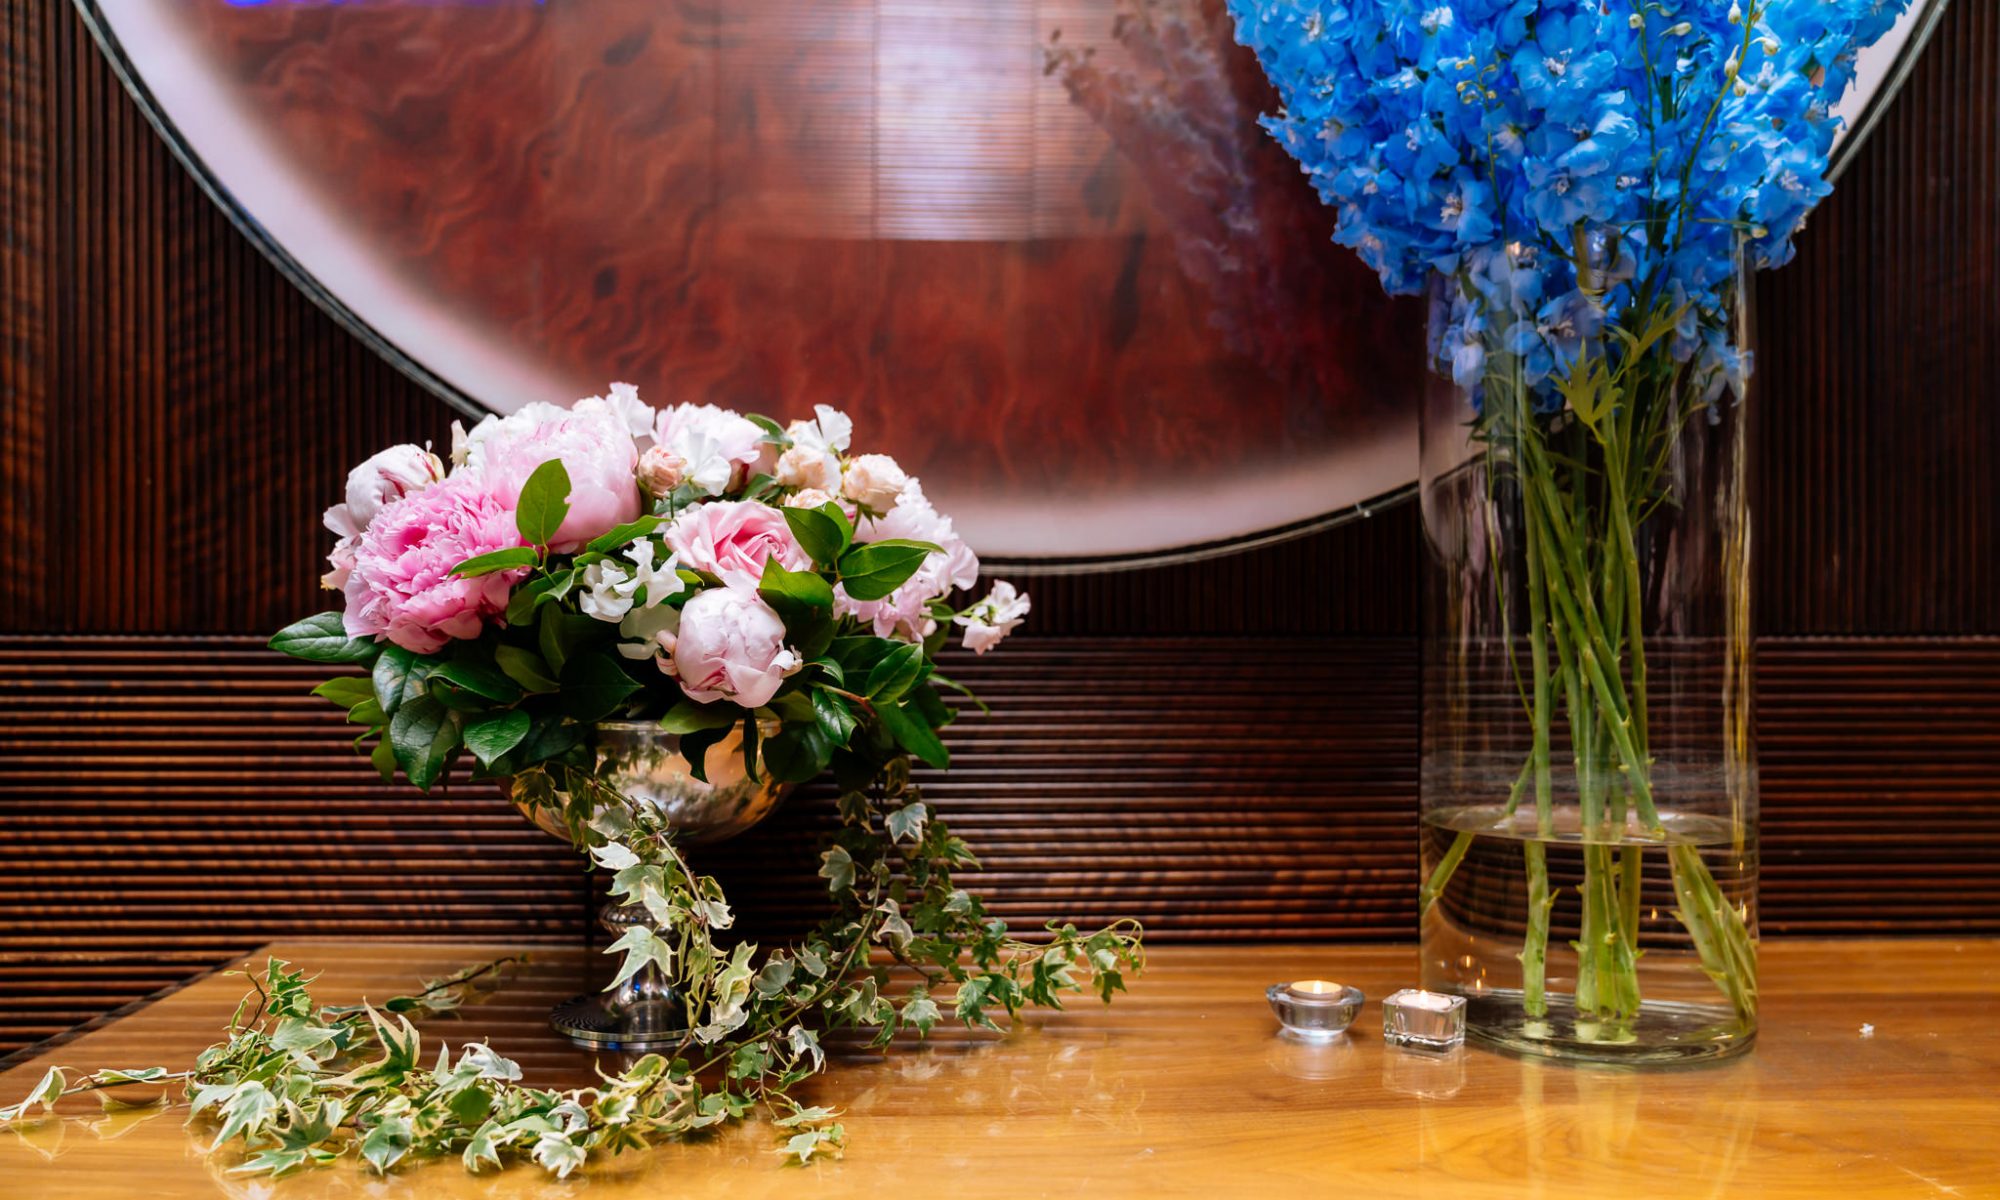 Lush Petals Luxury Florist In London Creating Floral Pieces That